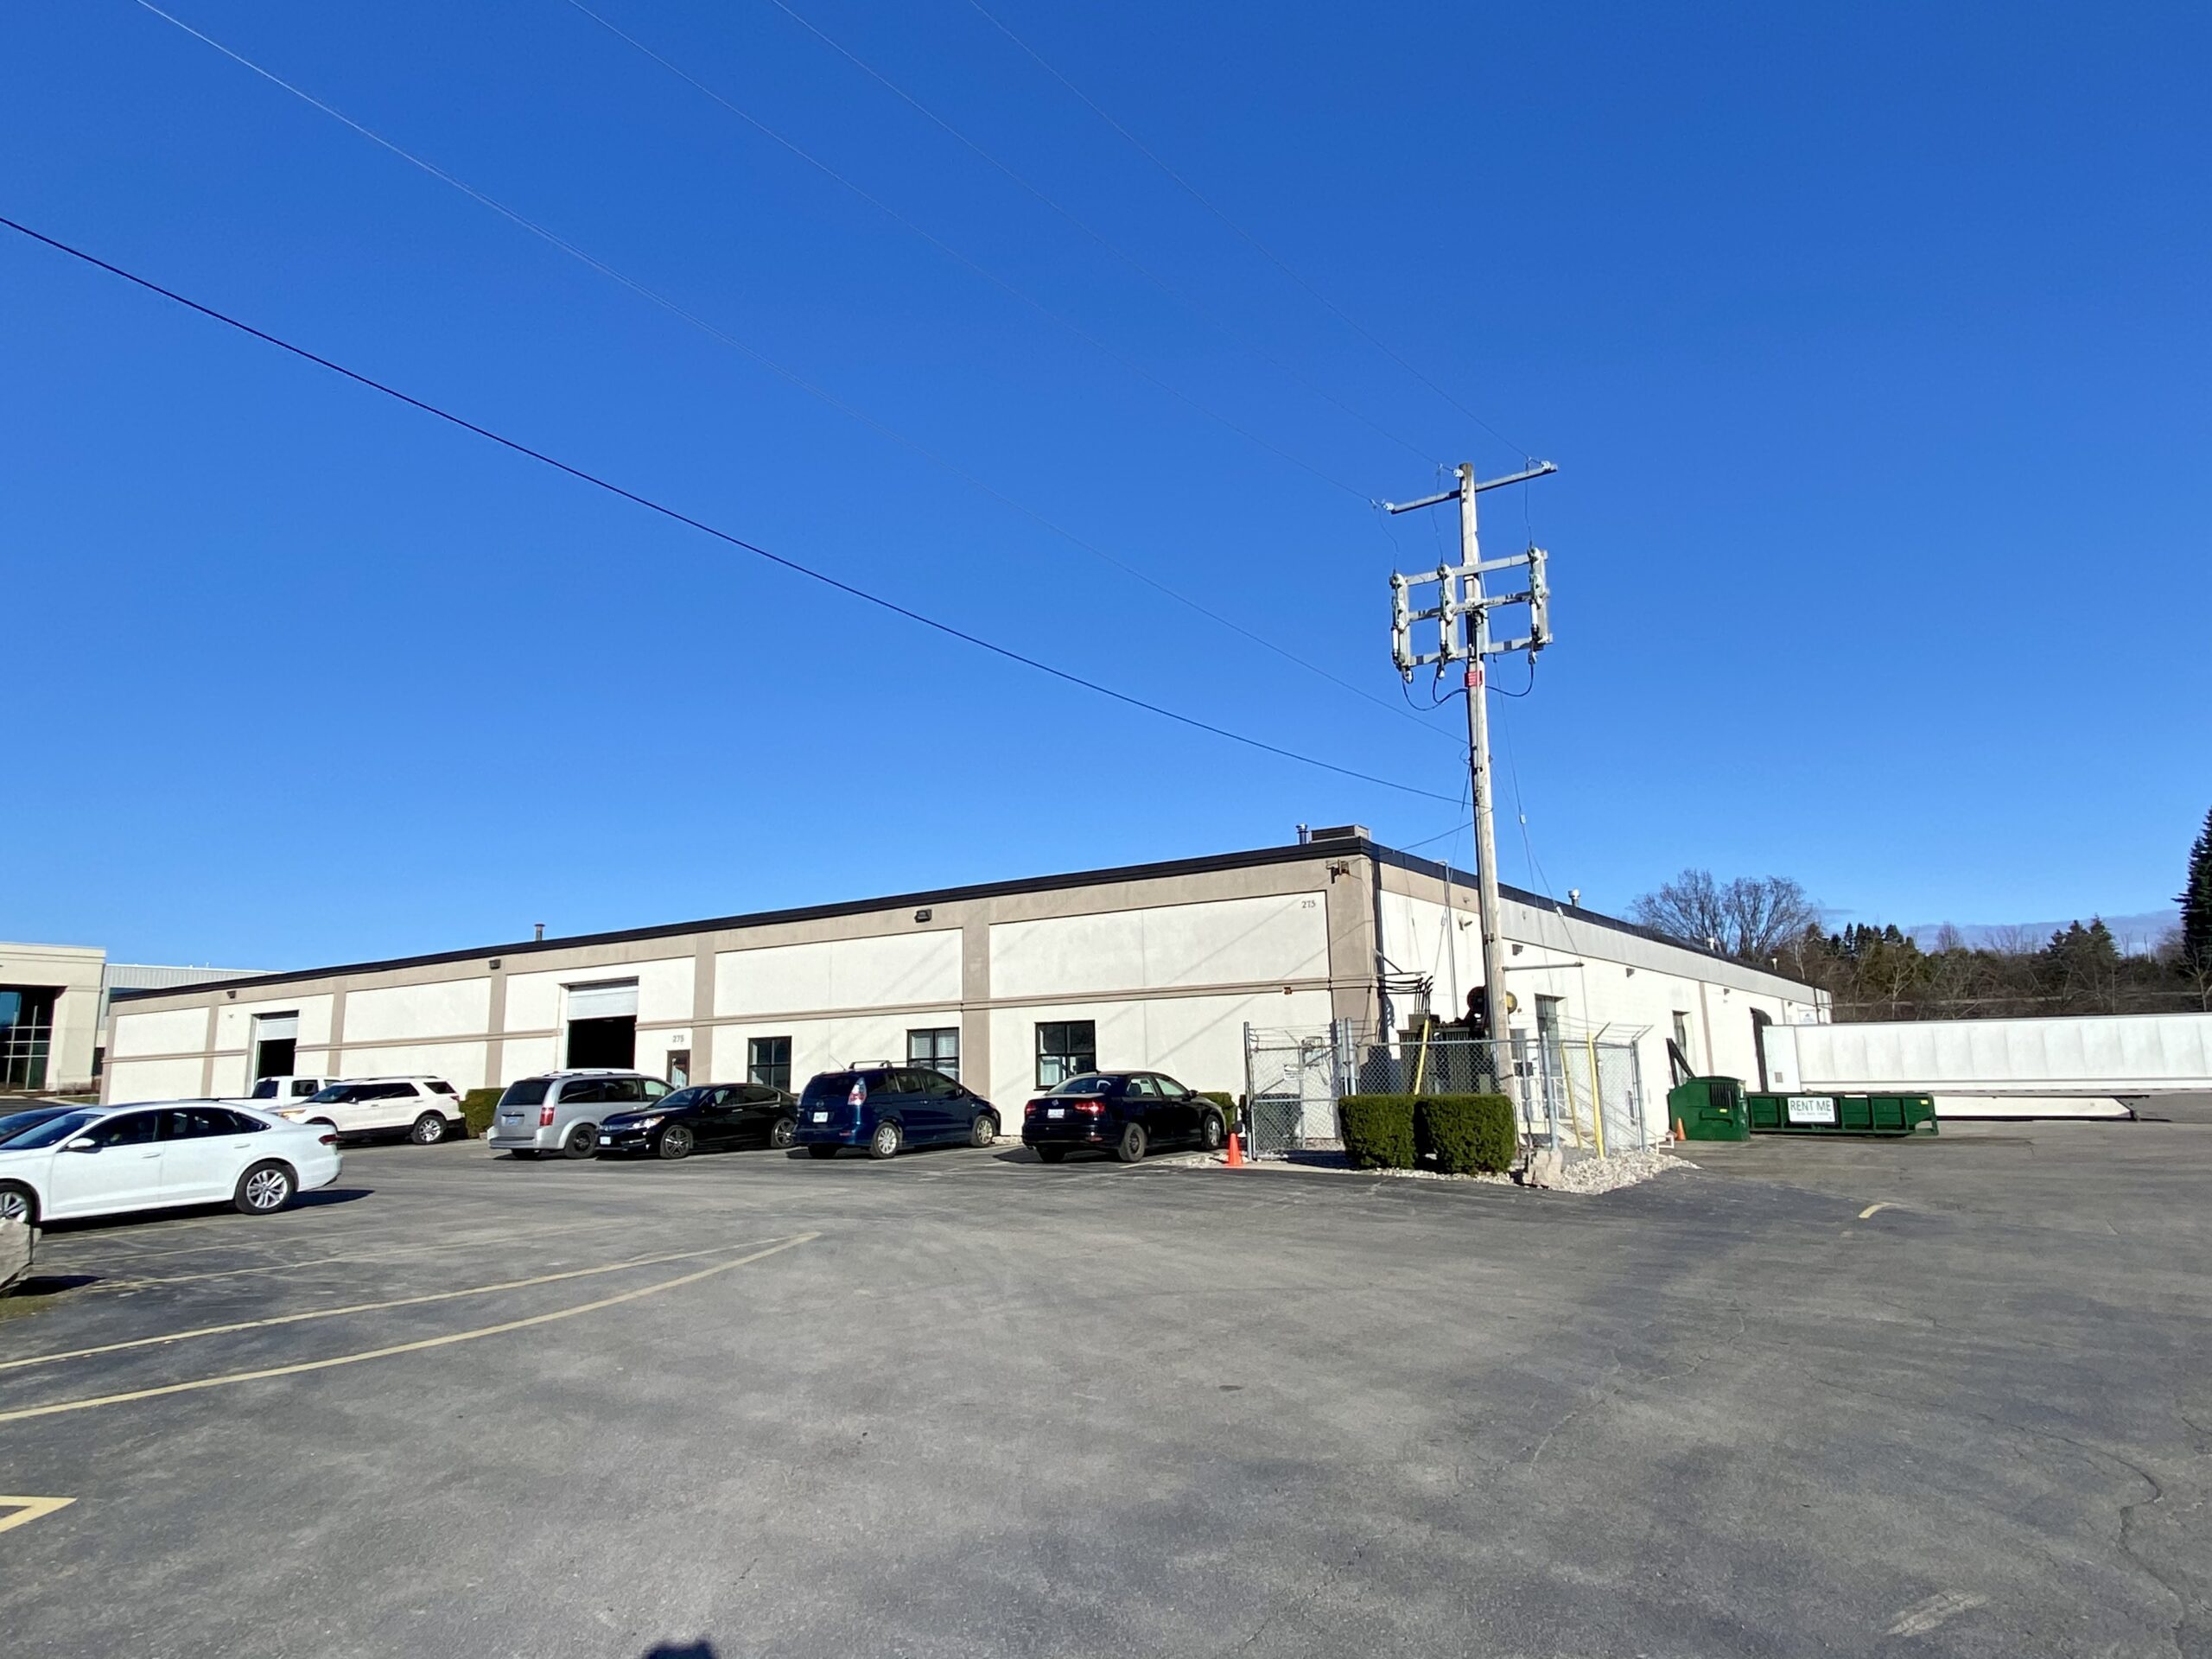 275 Gage Avenue, Unit 2, Kitchener | Industrial Space LEASED